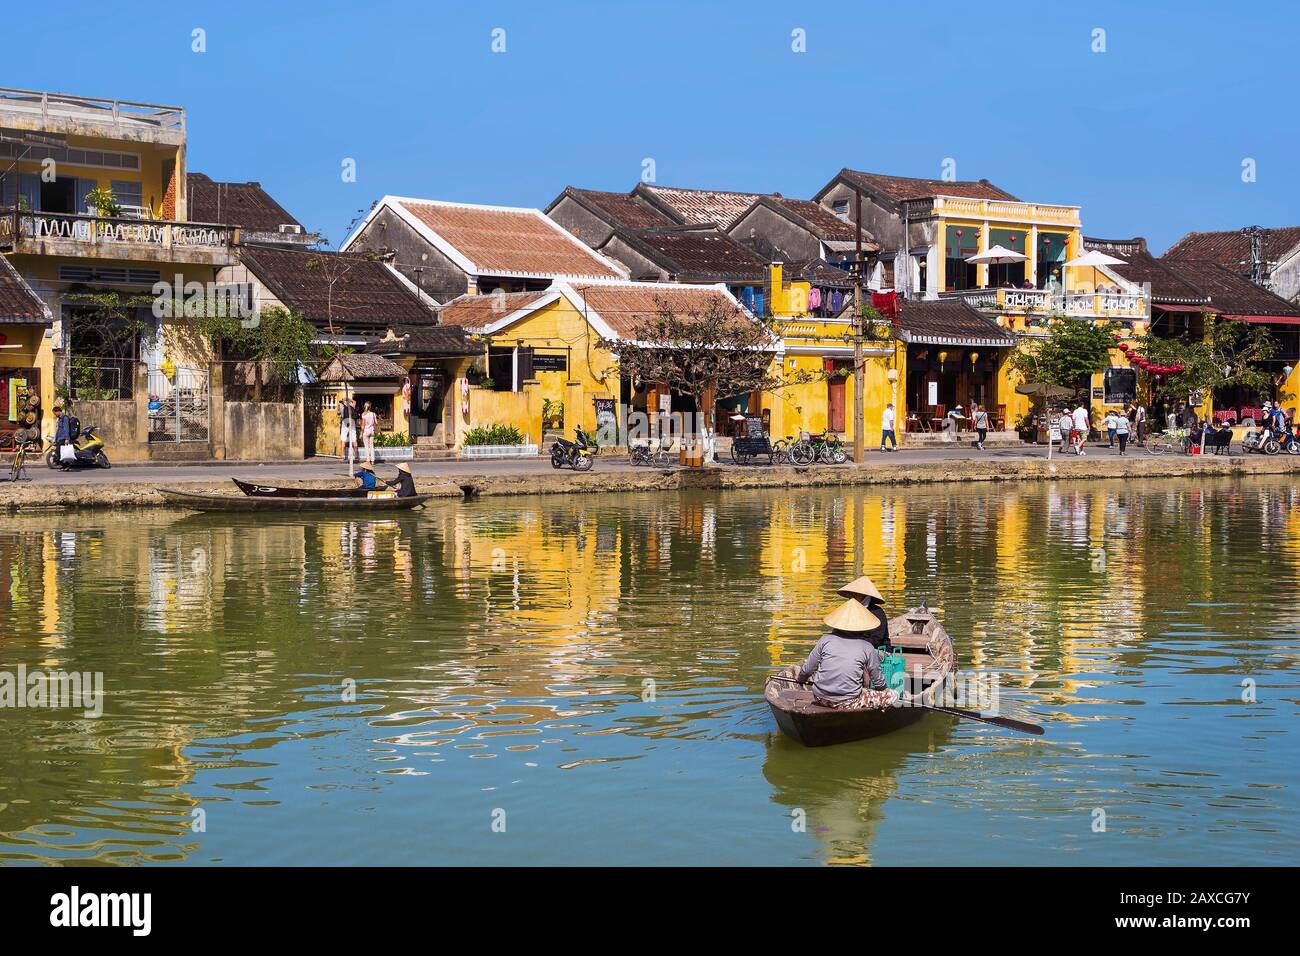 View of Ancient Town with boats on the Thu Bon river in Hoi An, Central Vietnam. Stock Photo